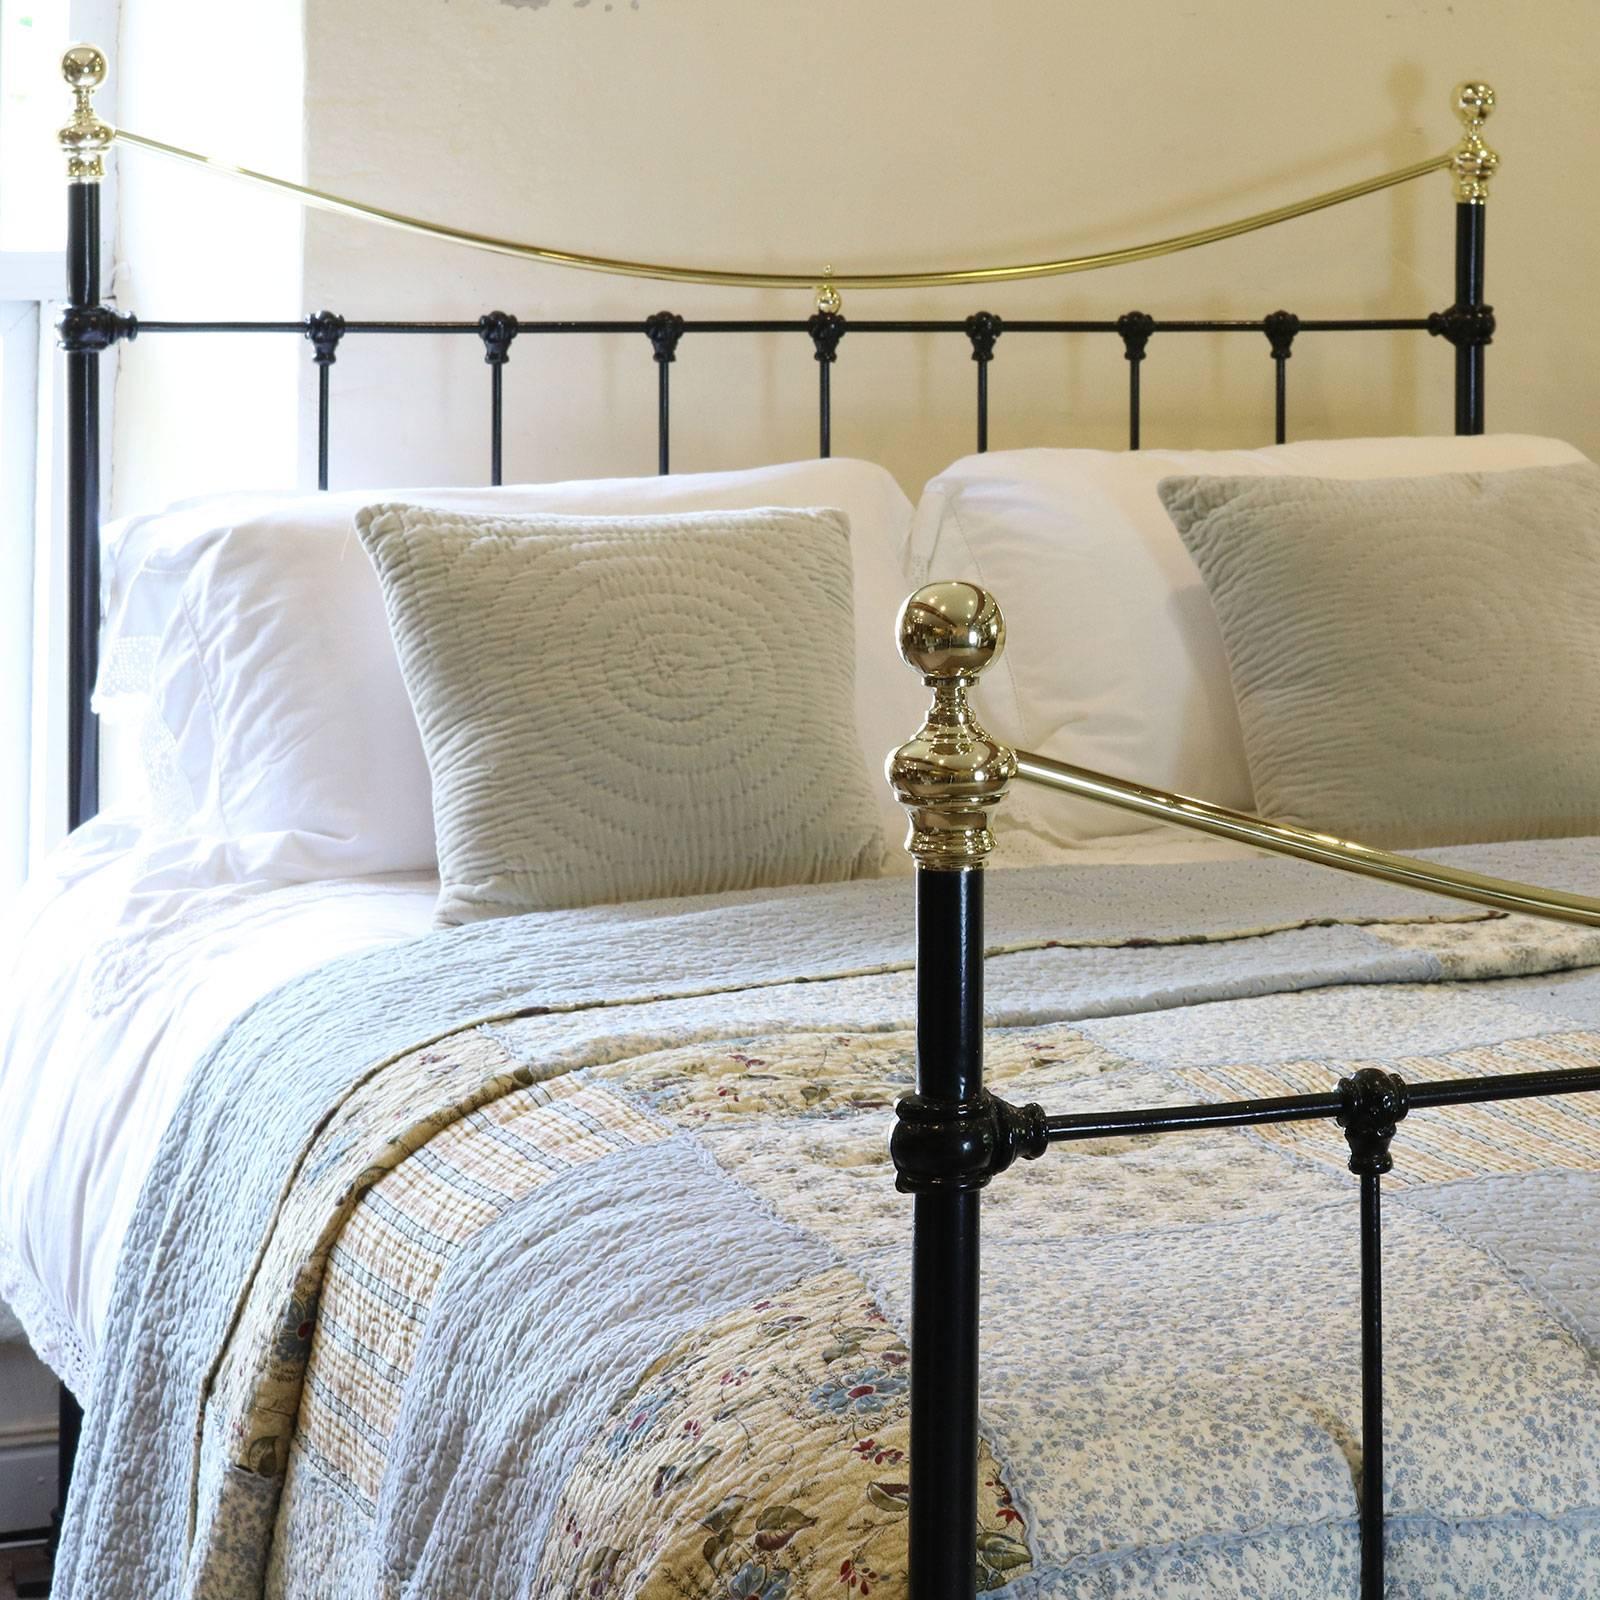 English Black Brass and Iron Bed, MK107